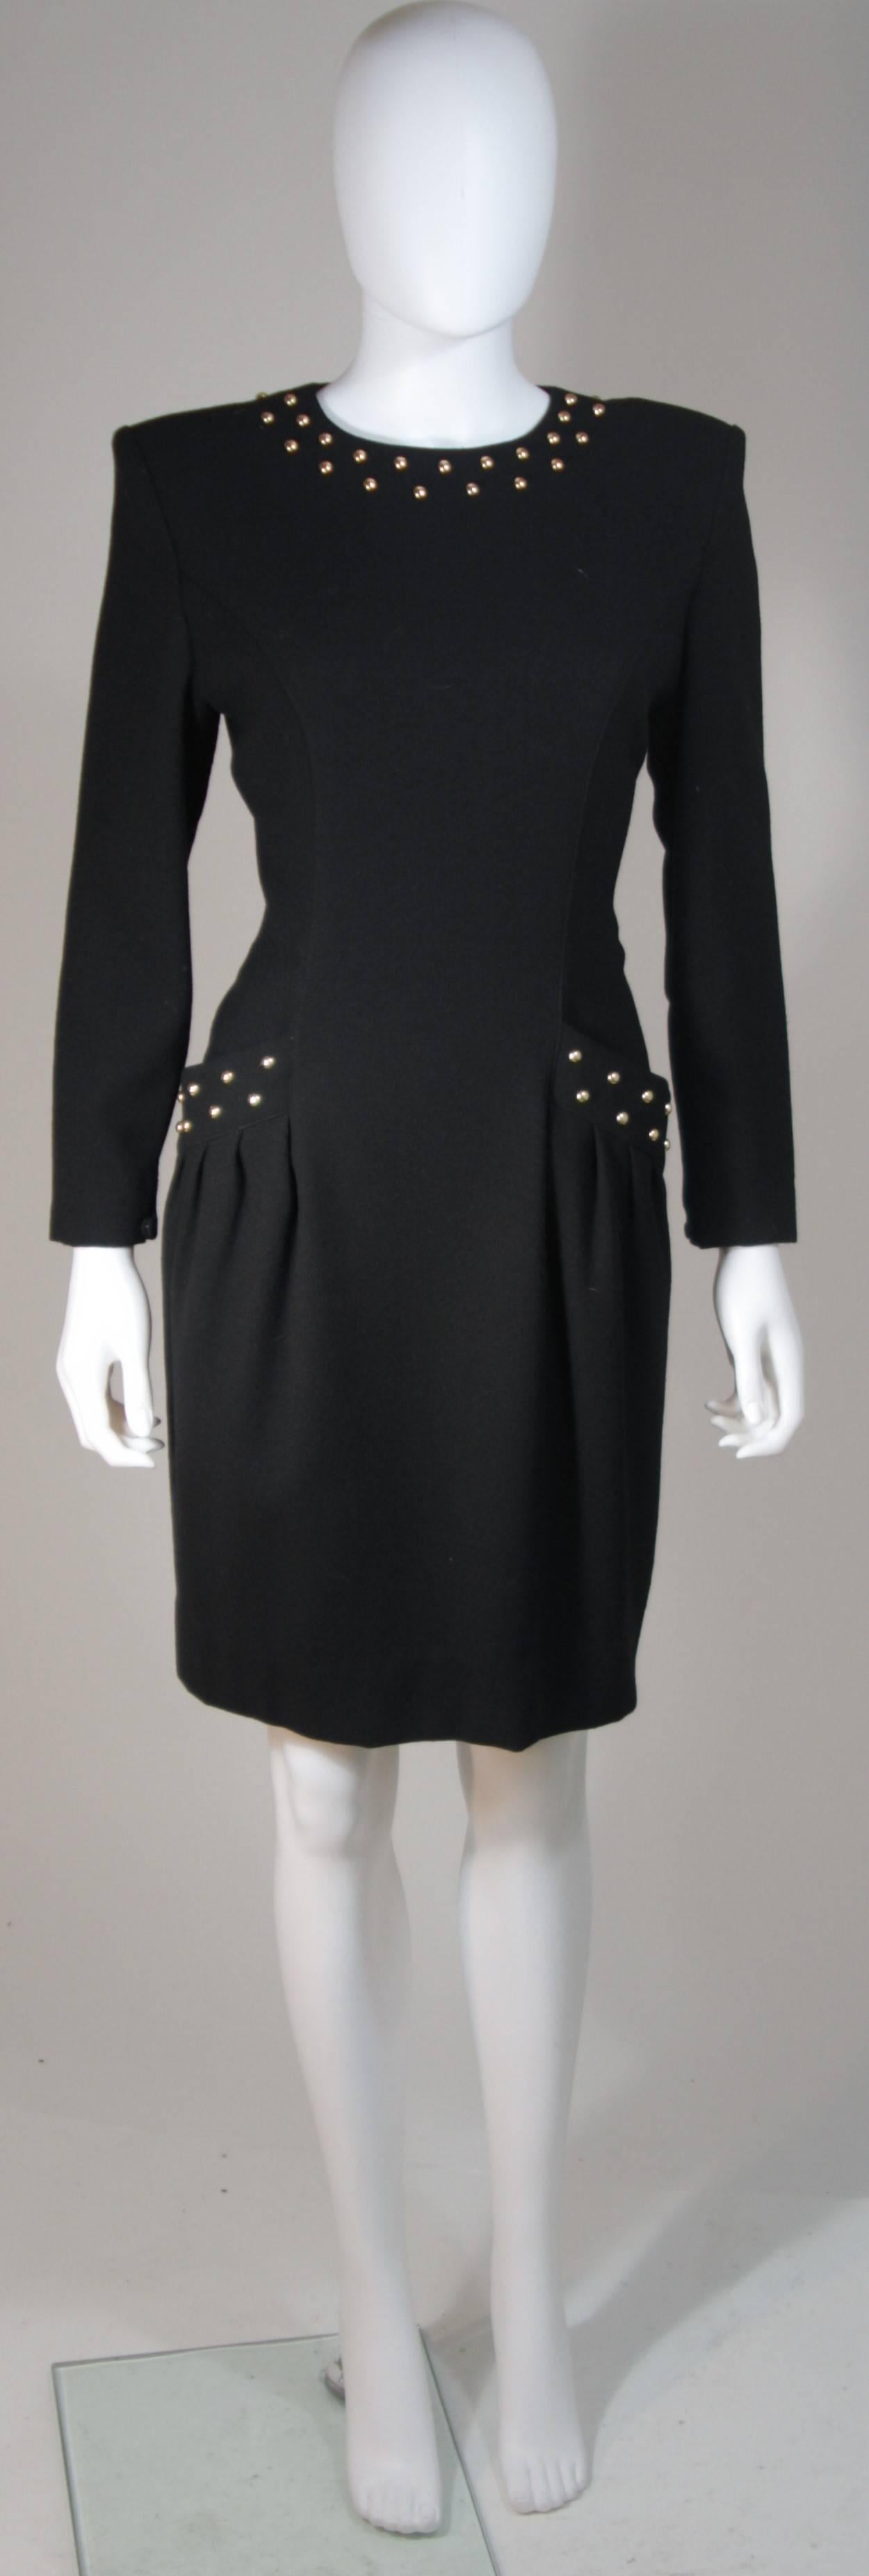  This Guy Laroche  cocktail dress is composed of a black fabric with gold stud applique. There is a center back zipper and front pockets with gathered detail. In excellent vintage condition. 

  **Please cross-reference measurements for personal